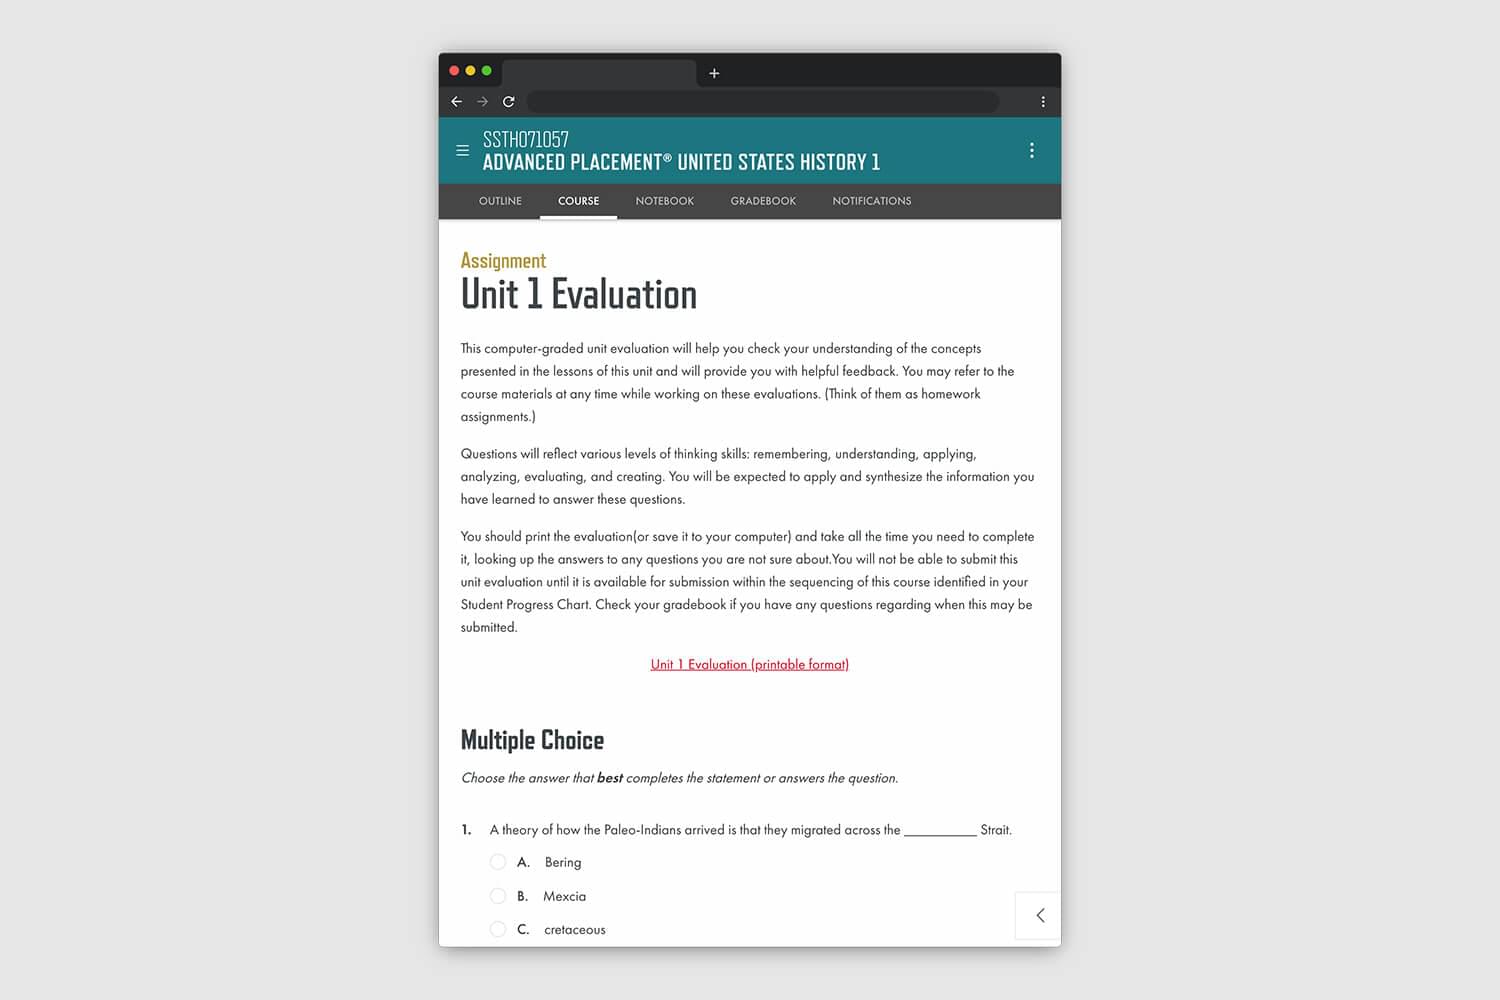 Theorem's course page on a tablet